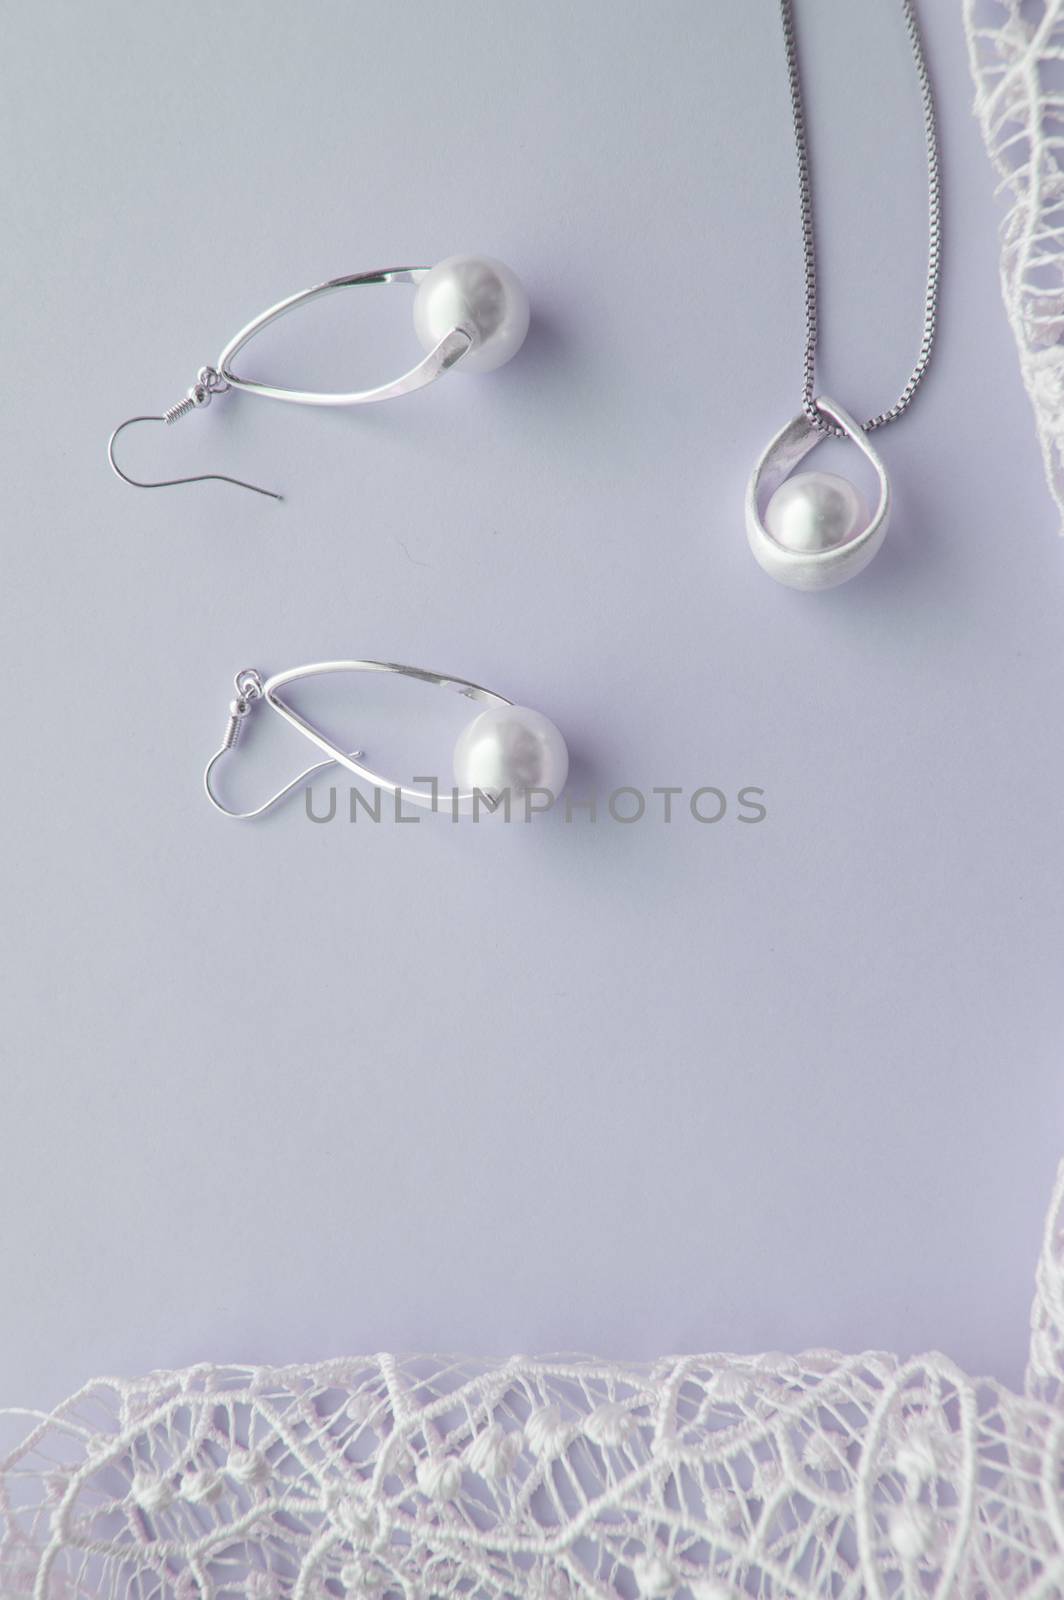 Beautiful silver shiny pearl jewelry, trendy glamorous earrings, chain on delicate pastel background with exquisite lace. Lay flat, top vertical frame by claire_lucia